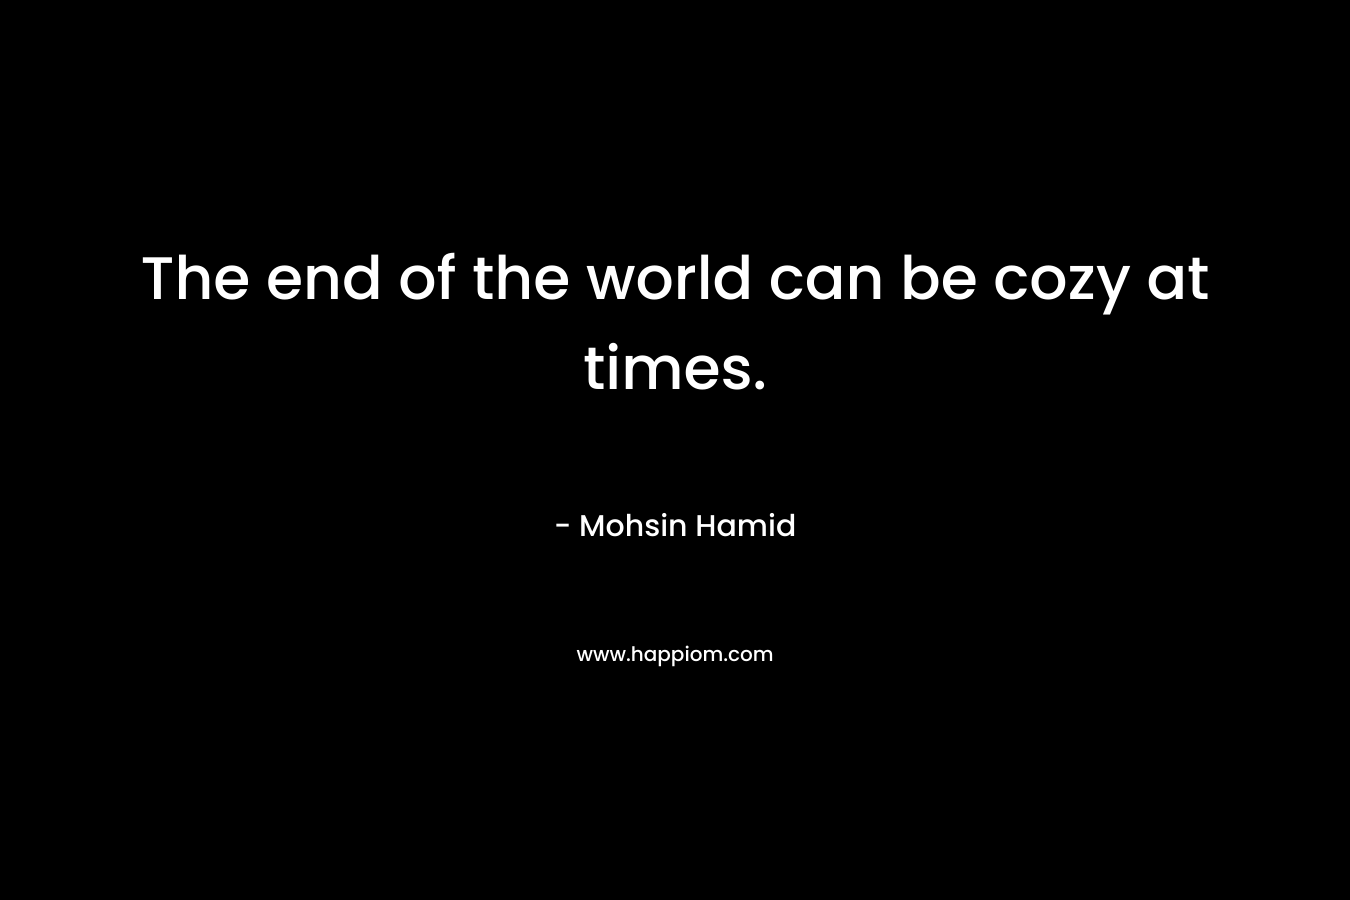 The end of the world can be cozy at times. – Mohsin Hamid